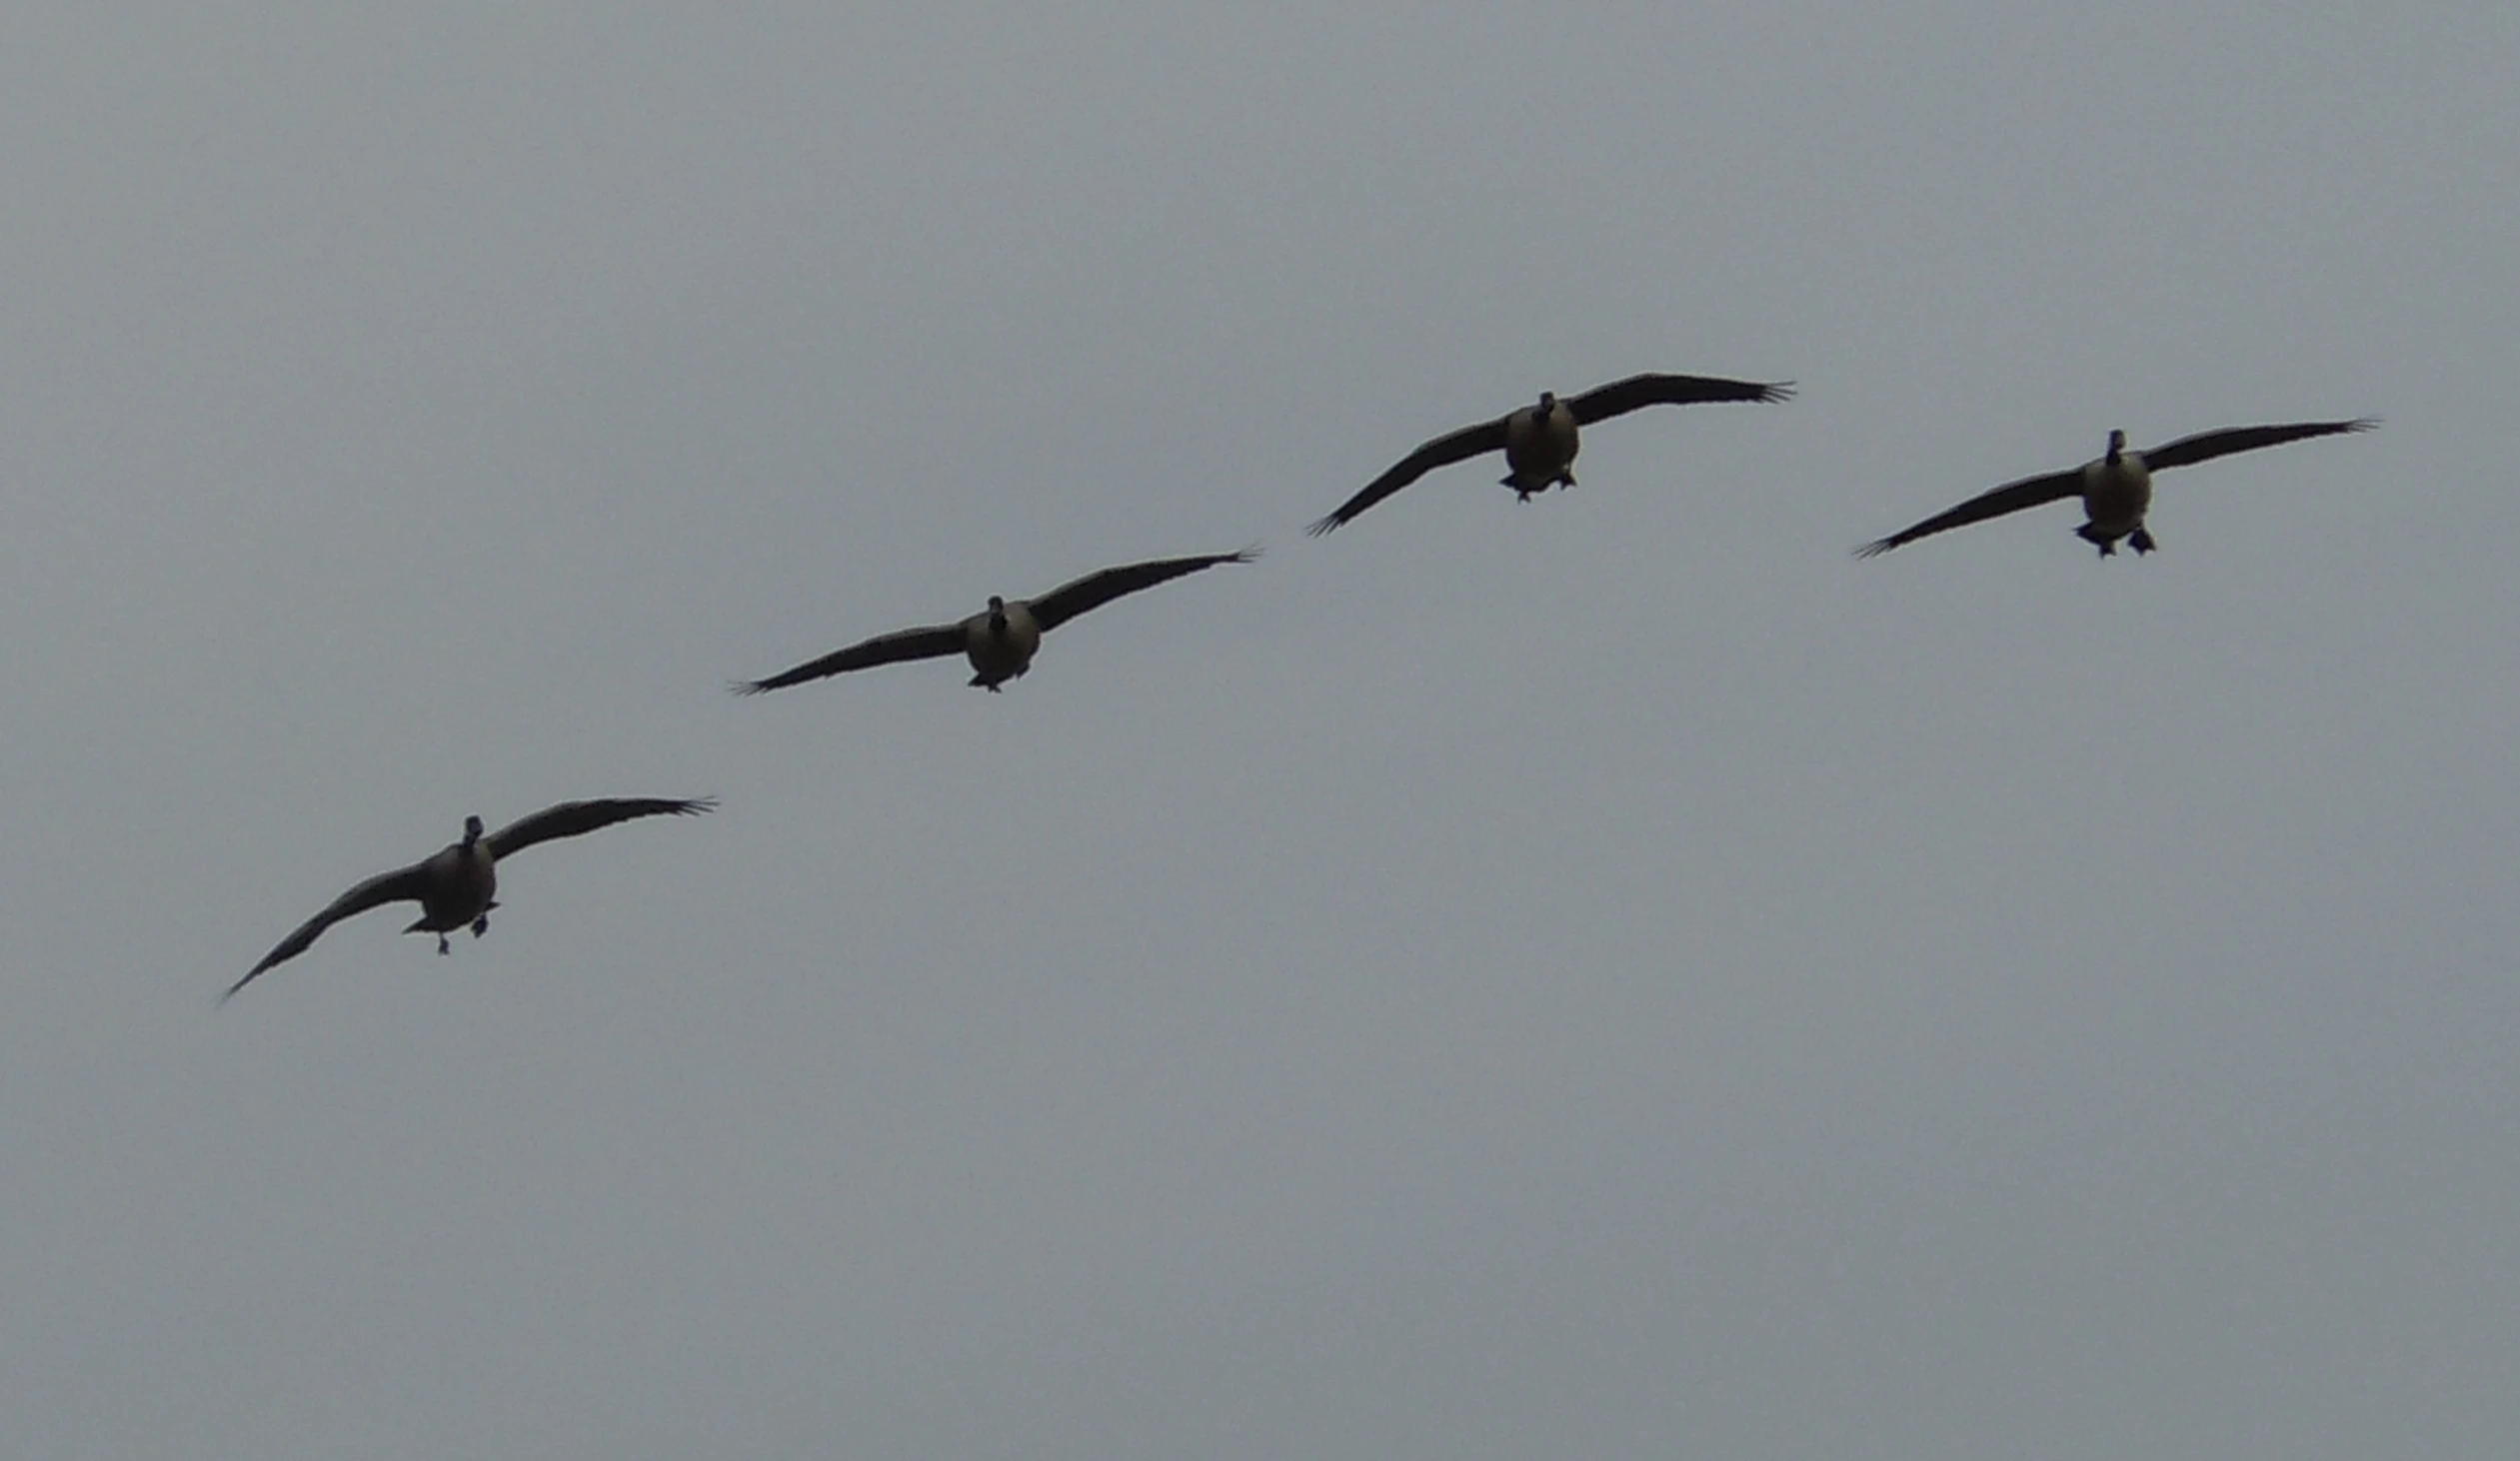 three birds are flying in formation in the air